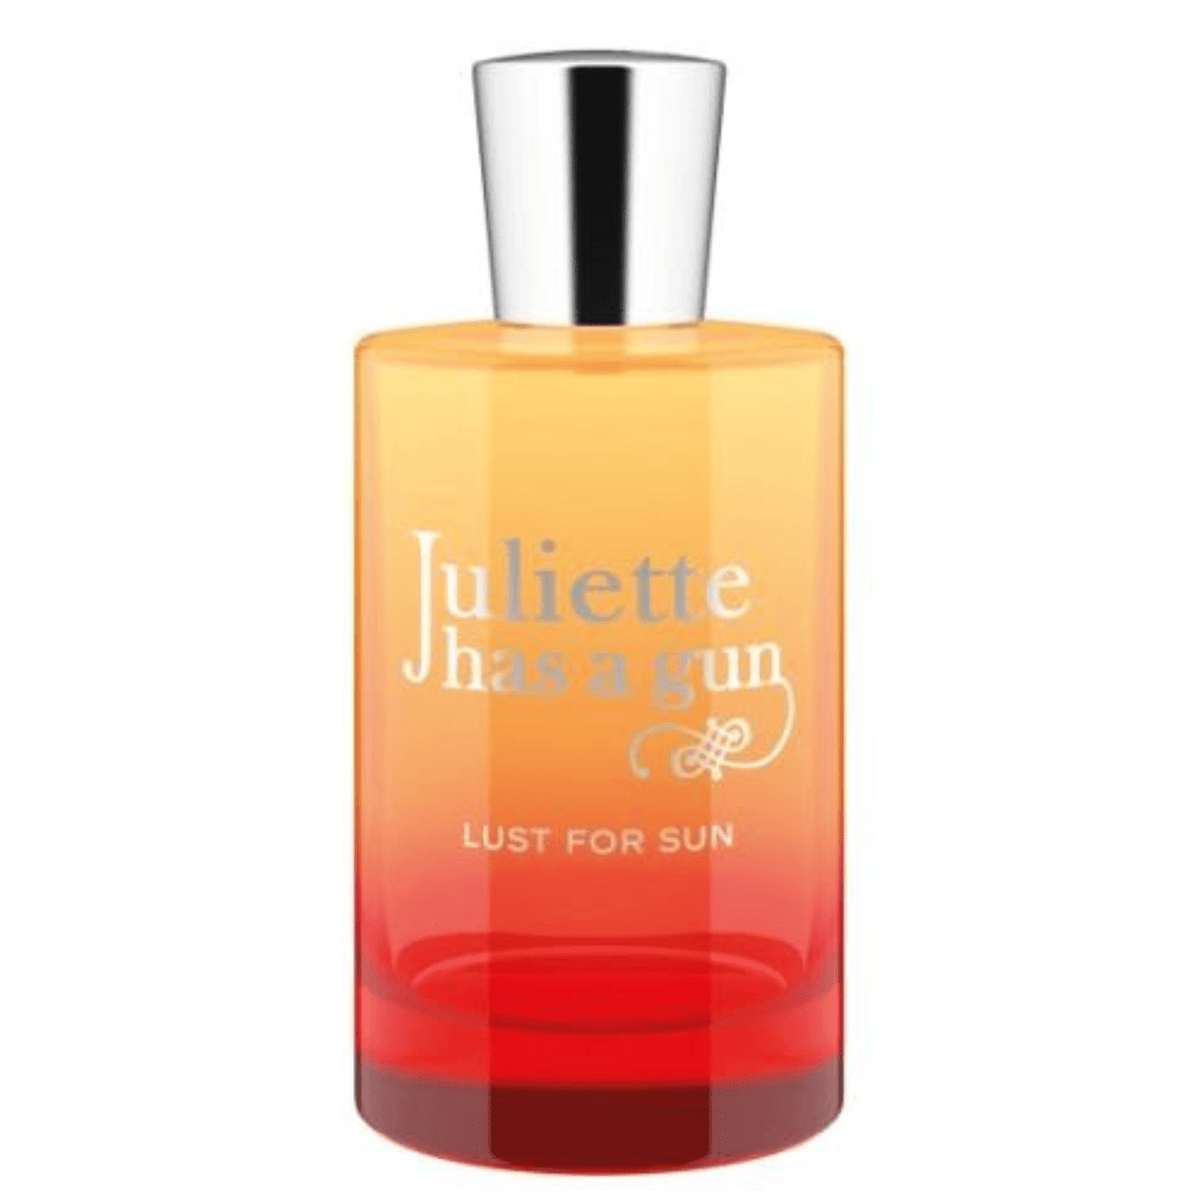 Primary Image of Lust for Sun EDP